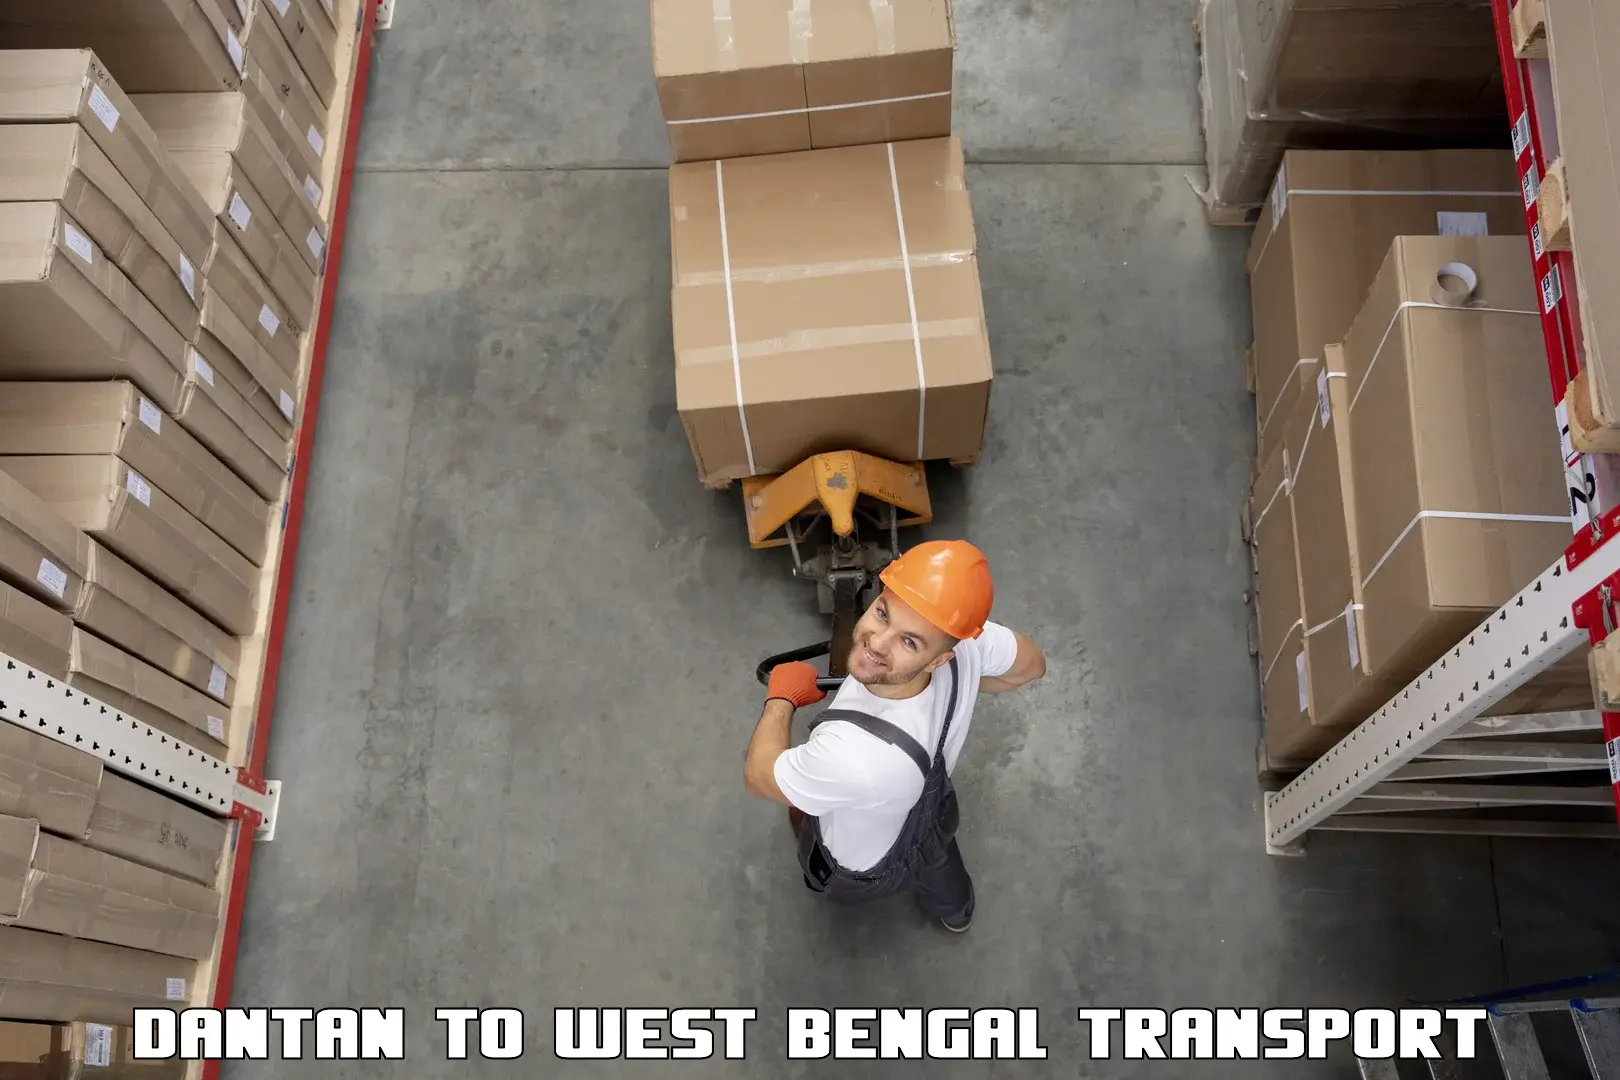 Container transport service Dantan to West Bengal